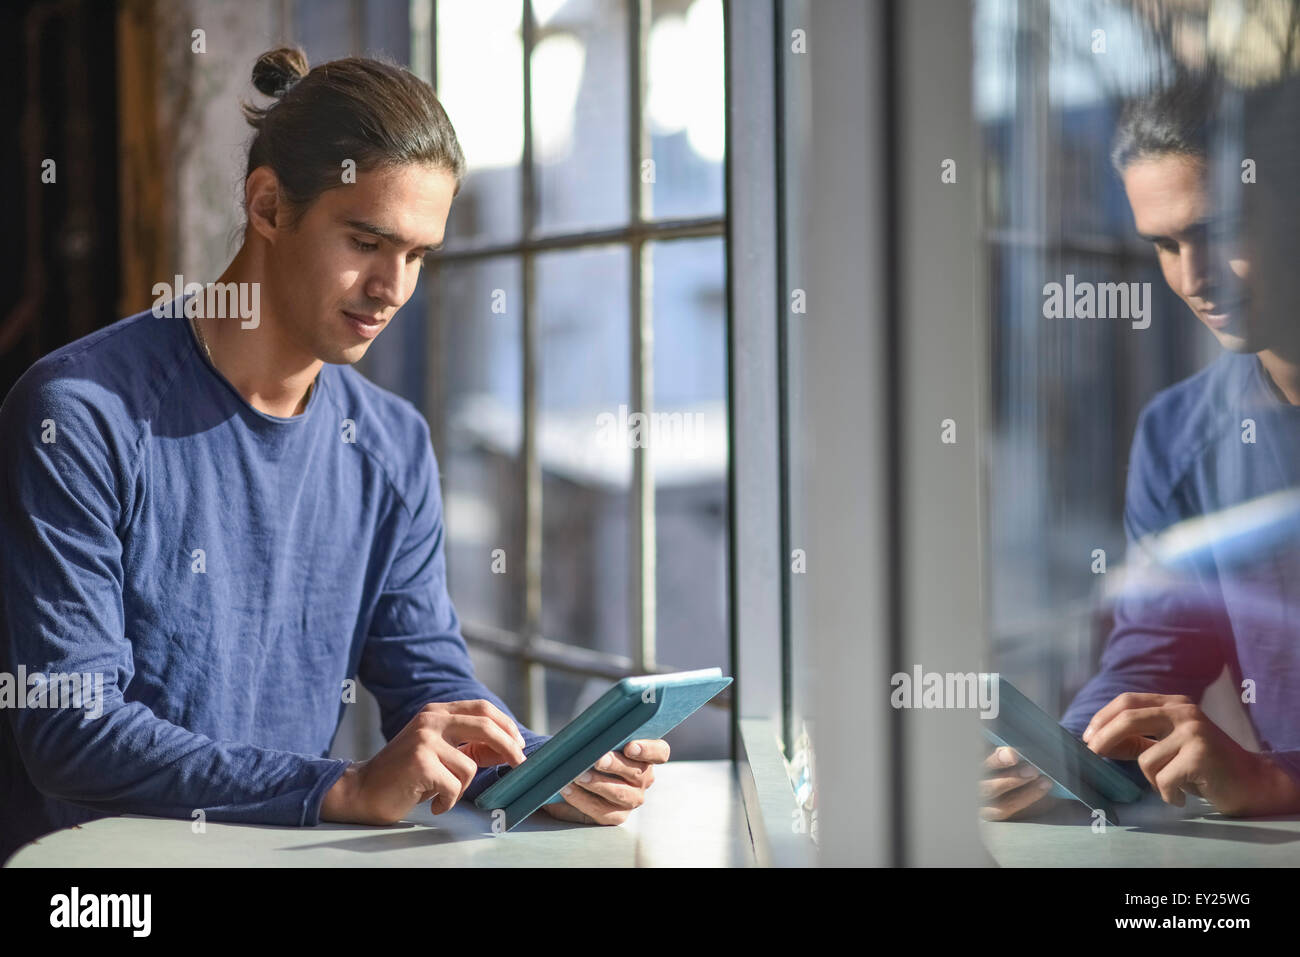 Young man using digital tablet Banque D'Images